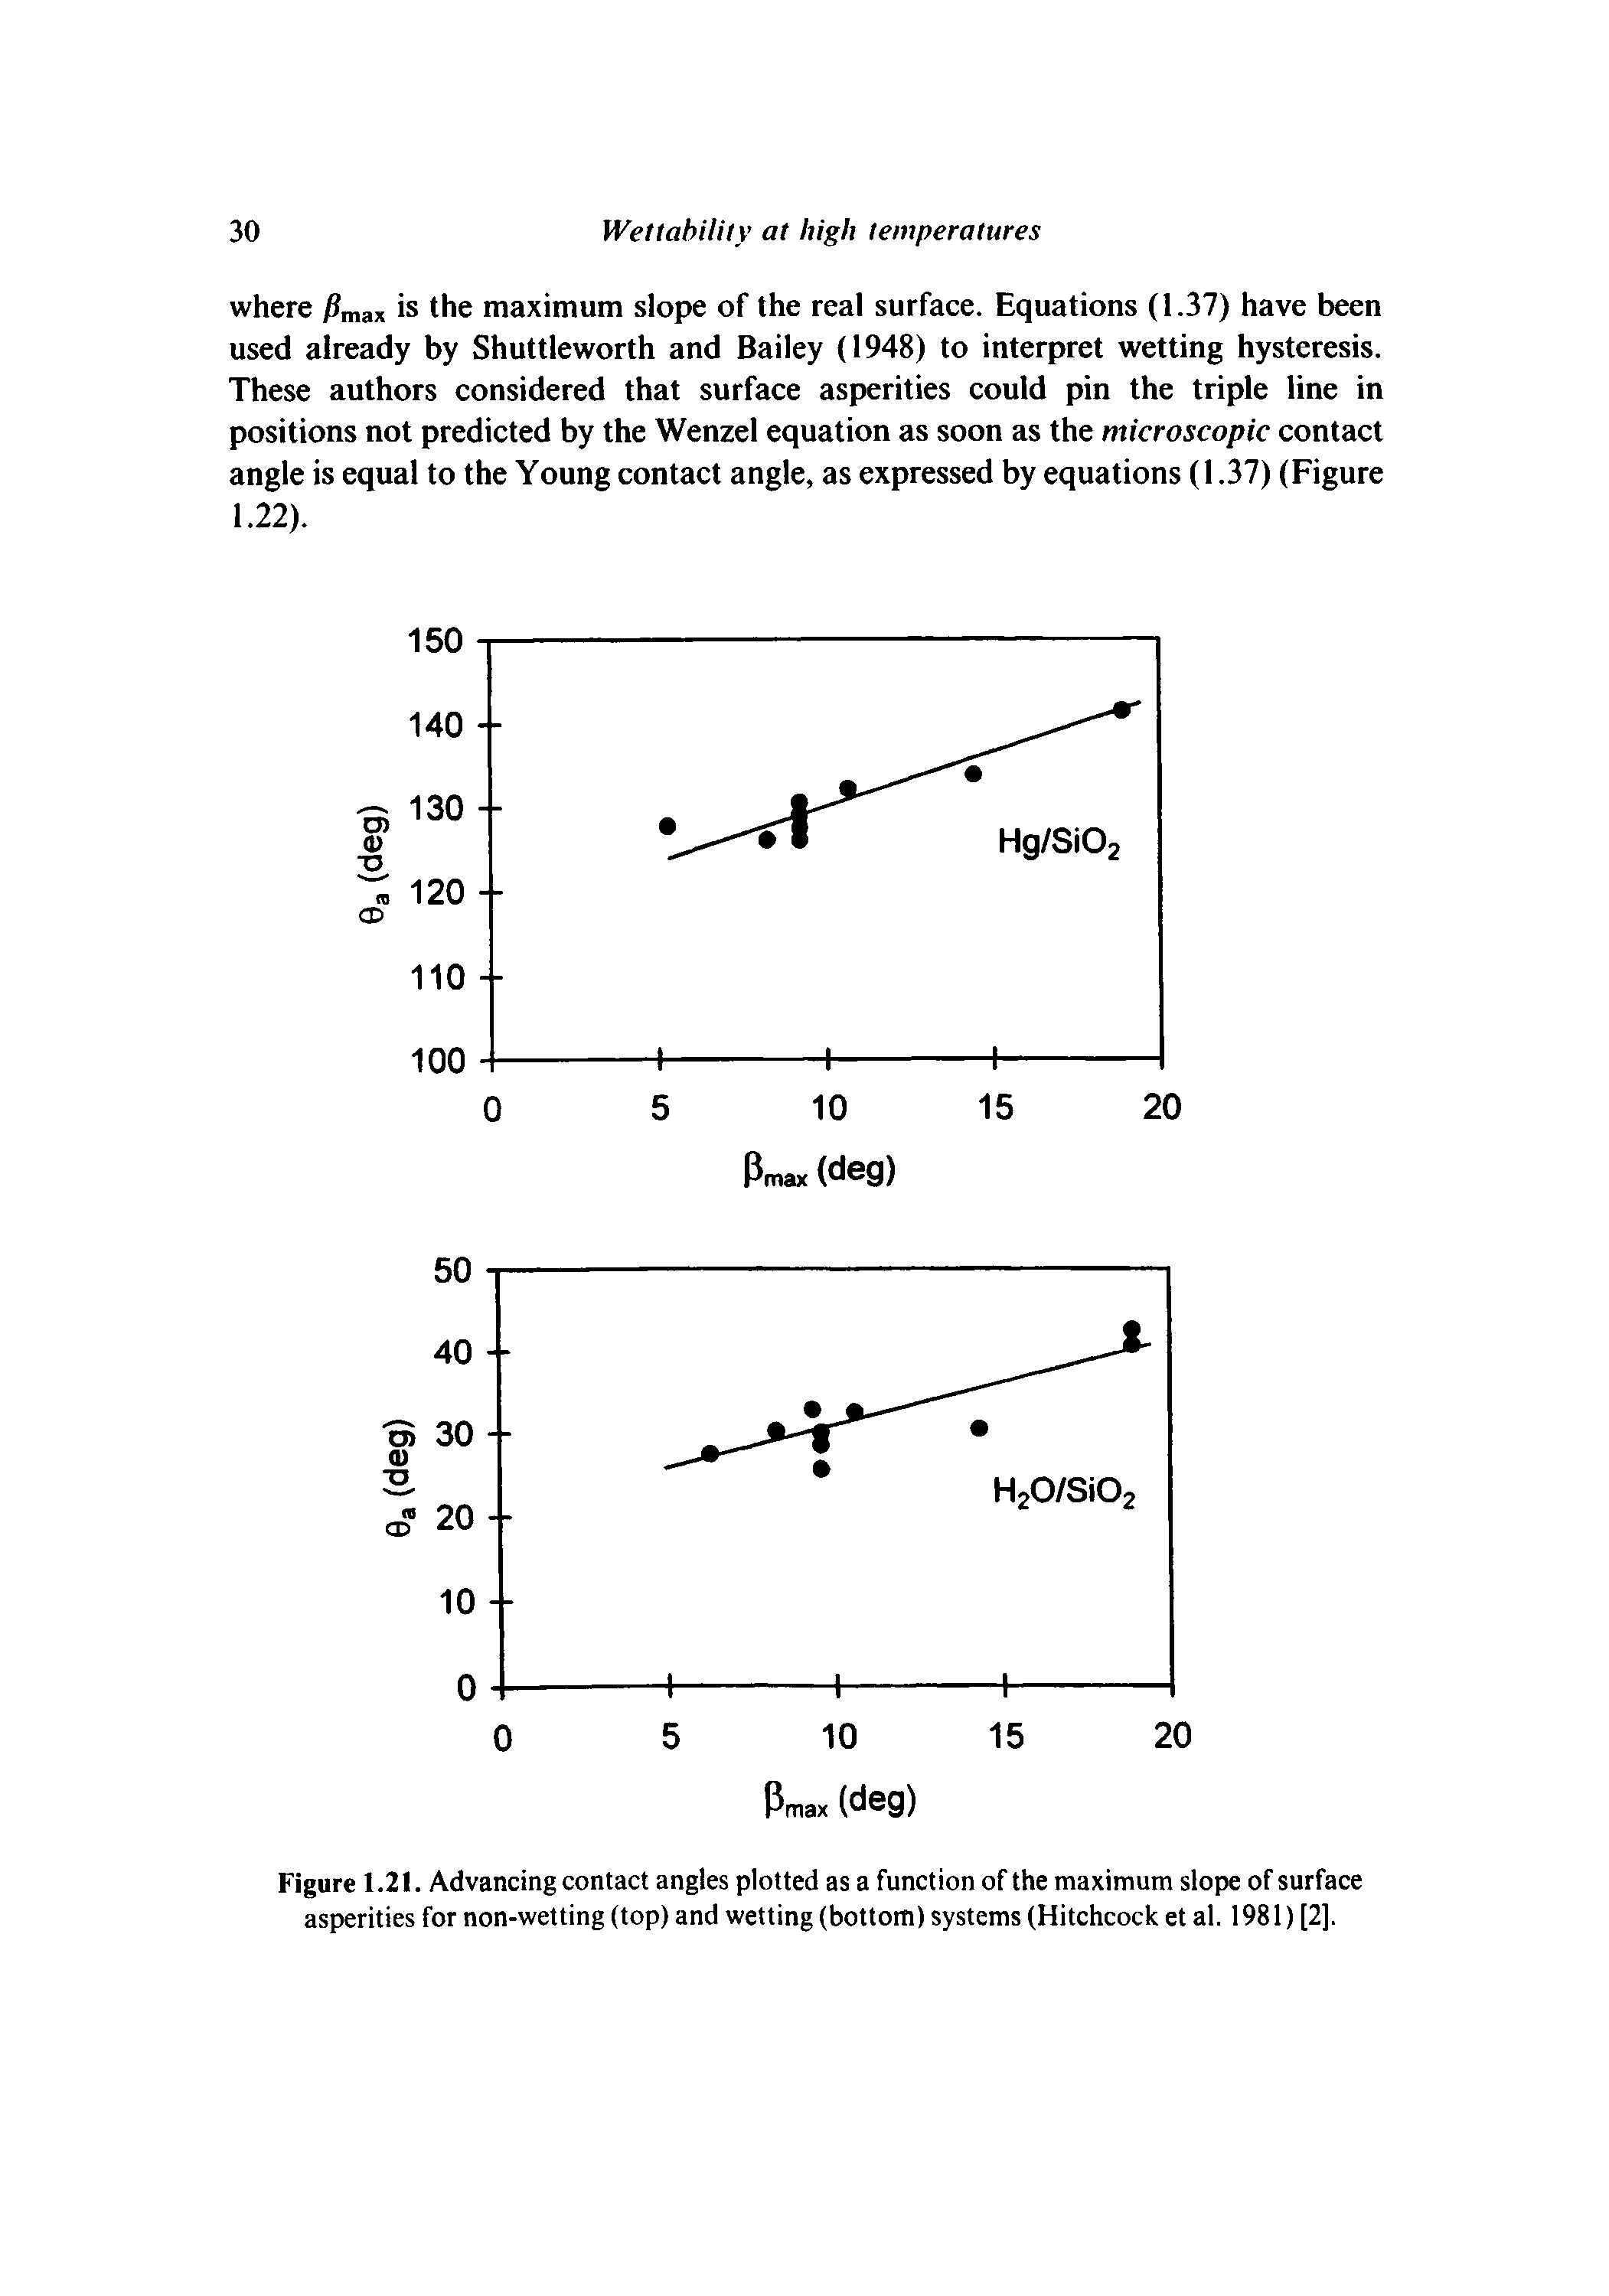 Figure 1.21. Advancing contact angles plotted as a function of the maximum slope of surface asperities for non-wetting (top) and wetting (bottom) systems (Hitchcock et al. 1981) [2],...